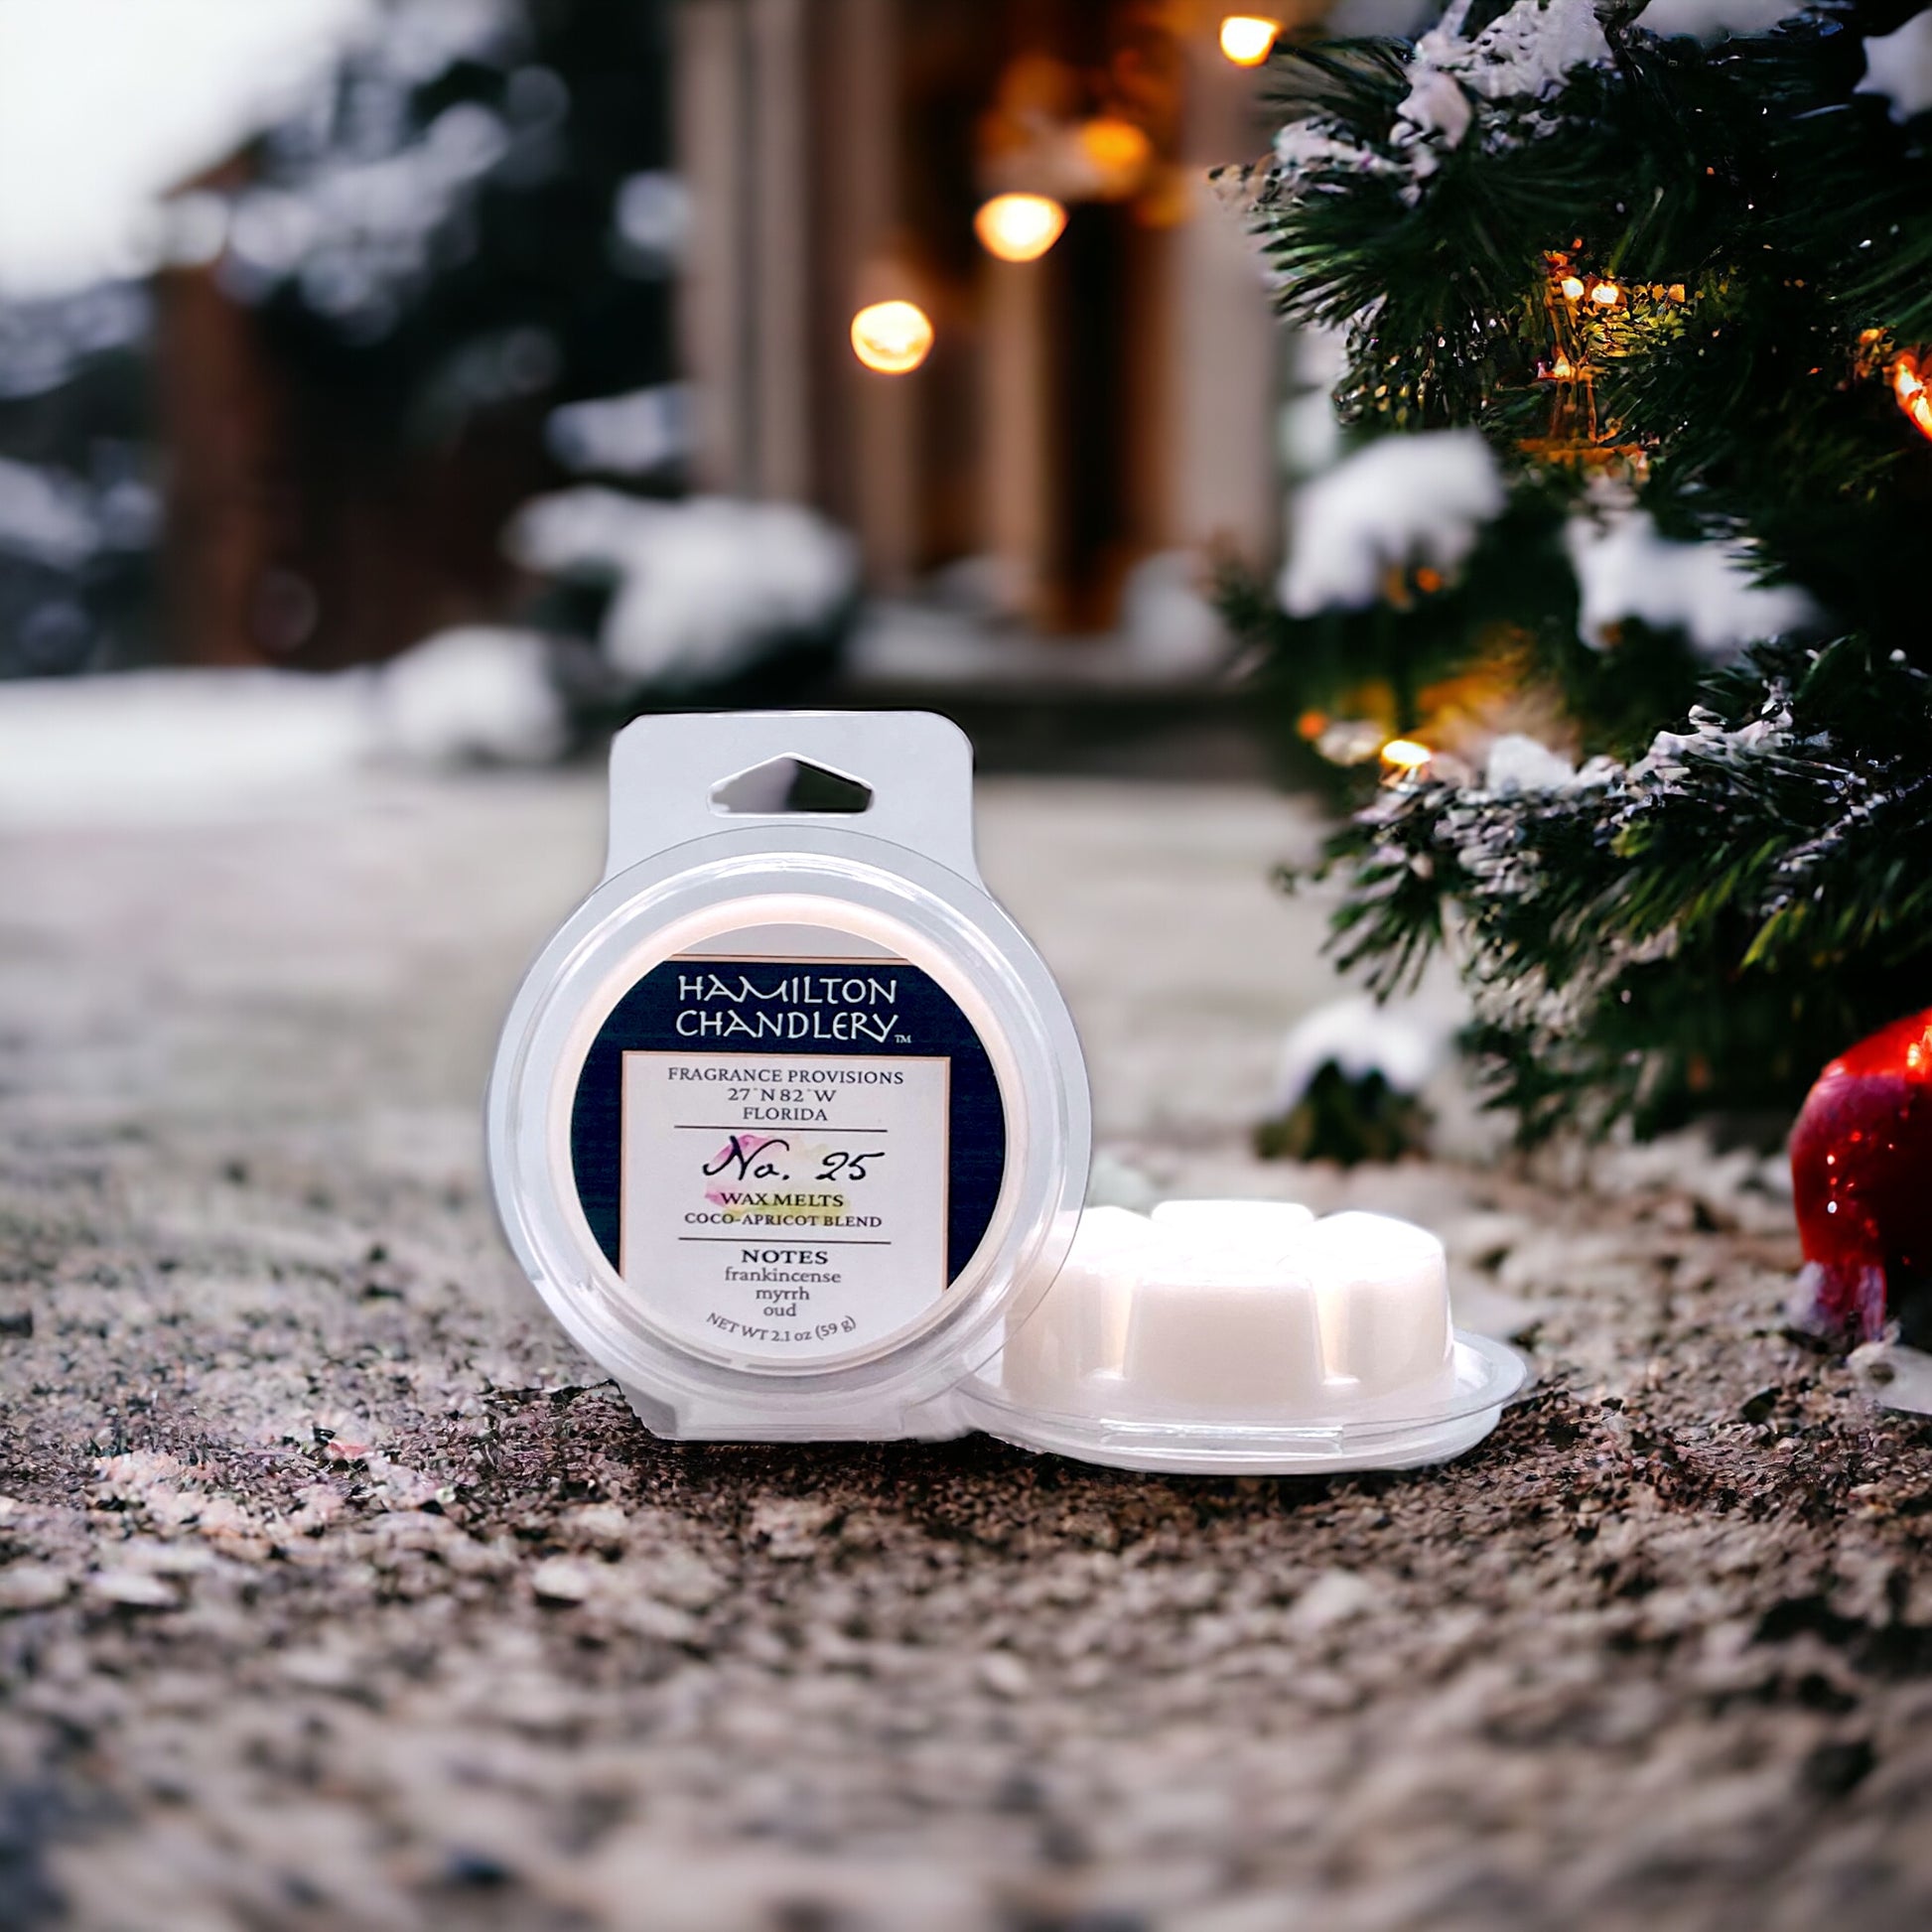 Fragrance No. 25 Wax Melts with Outdoor Holiday Decorations | Hamilton Chandlery